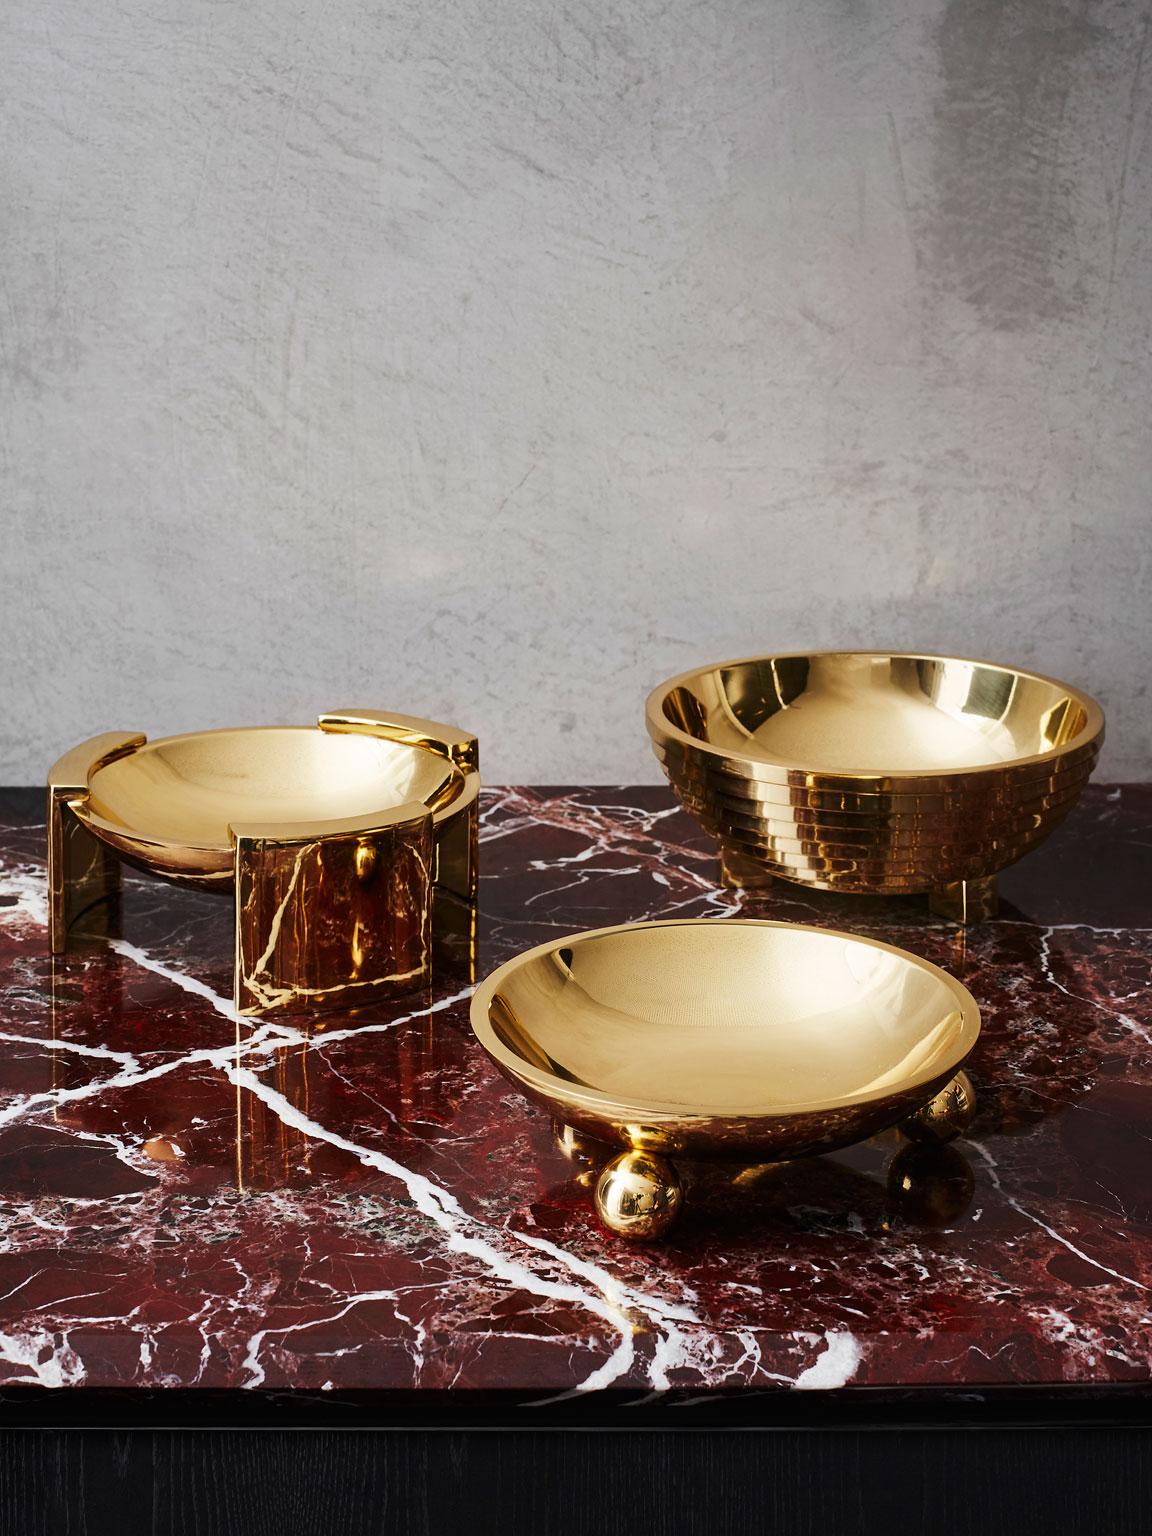 Nothing beats the impeccable gleam of solid, hand-polished brass for that final elegant, decorative layer to your interior. This beautiful piece designed in Australia by Greg Natale is assured to become an heirloom. Its weight, finish and visual